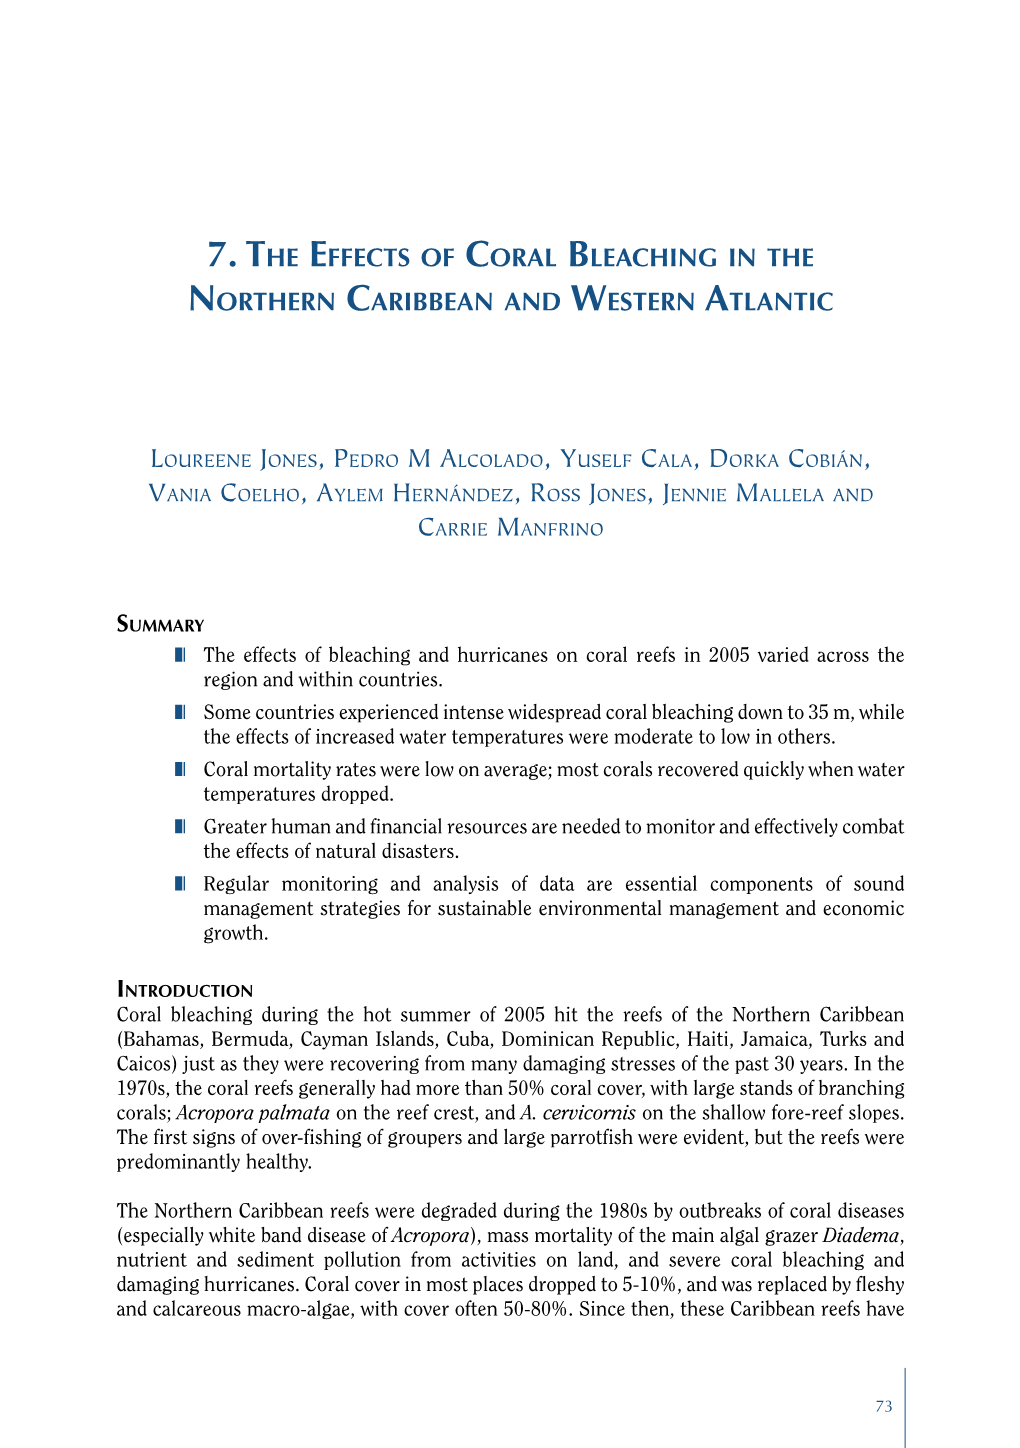 The Effects of Coral Bleaching in the Northern Caribbean and Western Atlantic